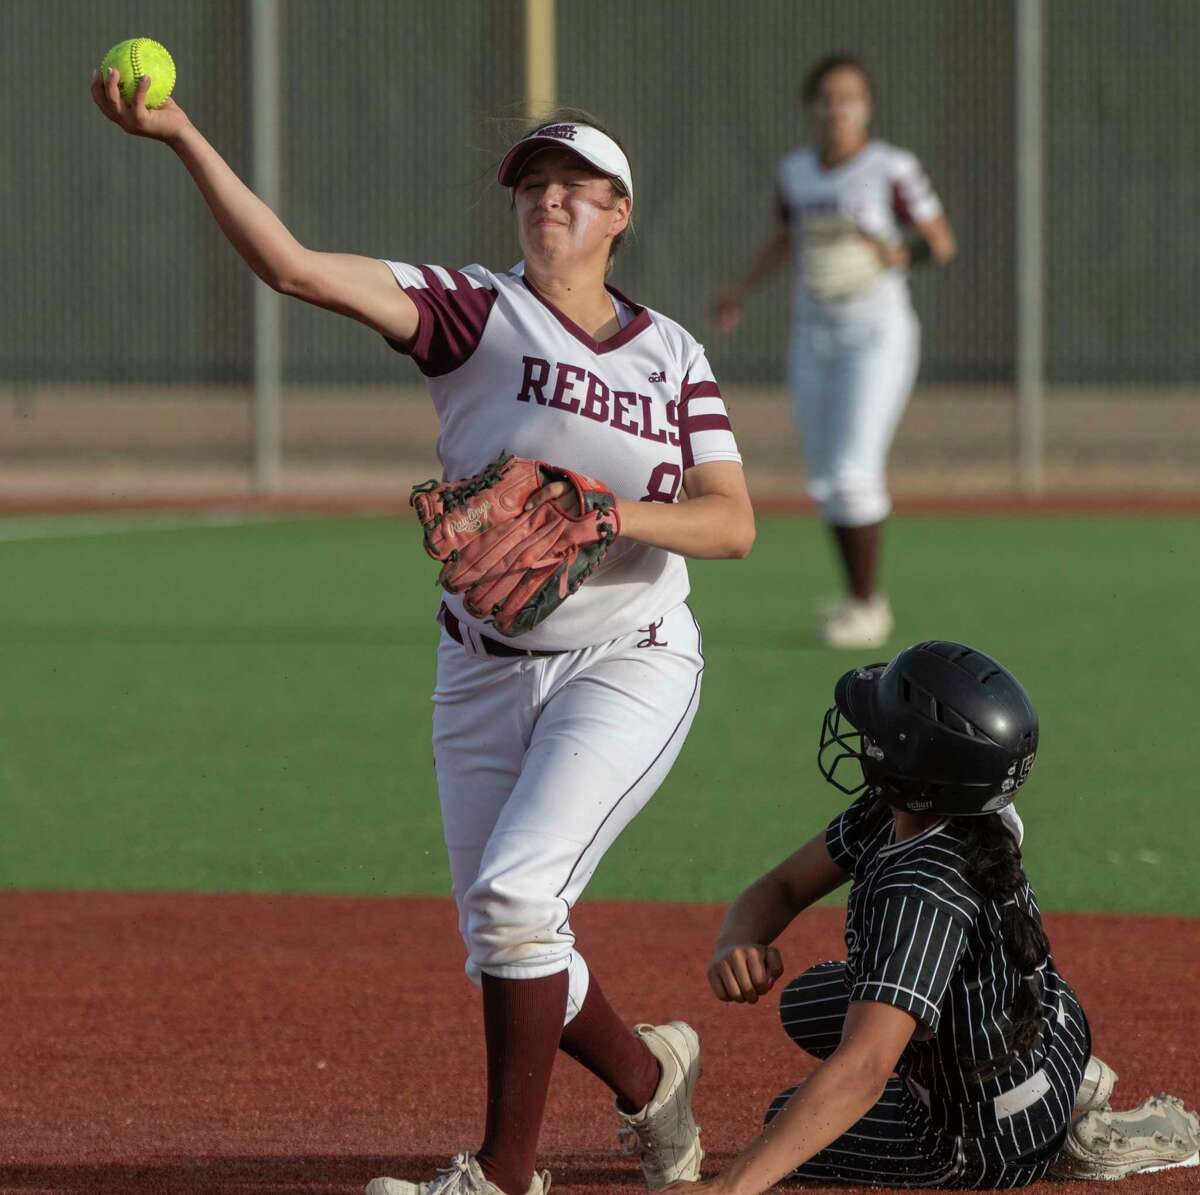 Legacy High's Alfa Laredo gets the force out at second on Permian's Madison Garcia, but pulls back her throw to first 03/29/2022 at Gene Smith Field. Tim Fischer/Reporter-Telegram